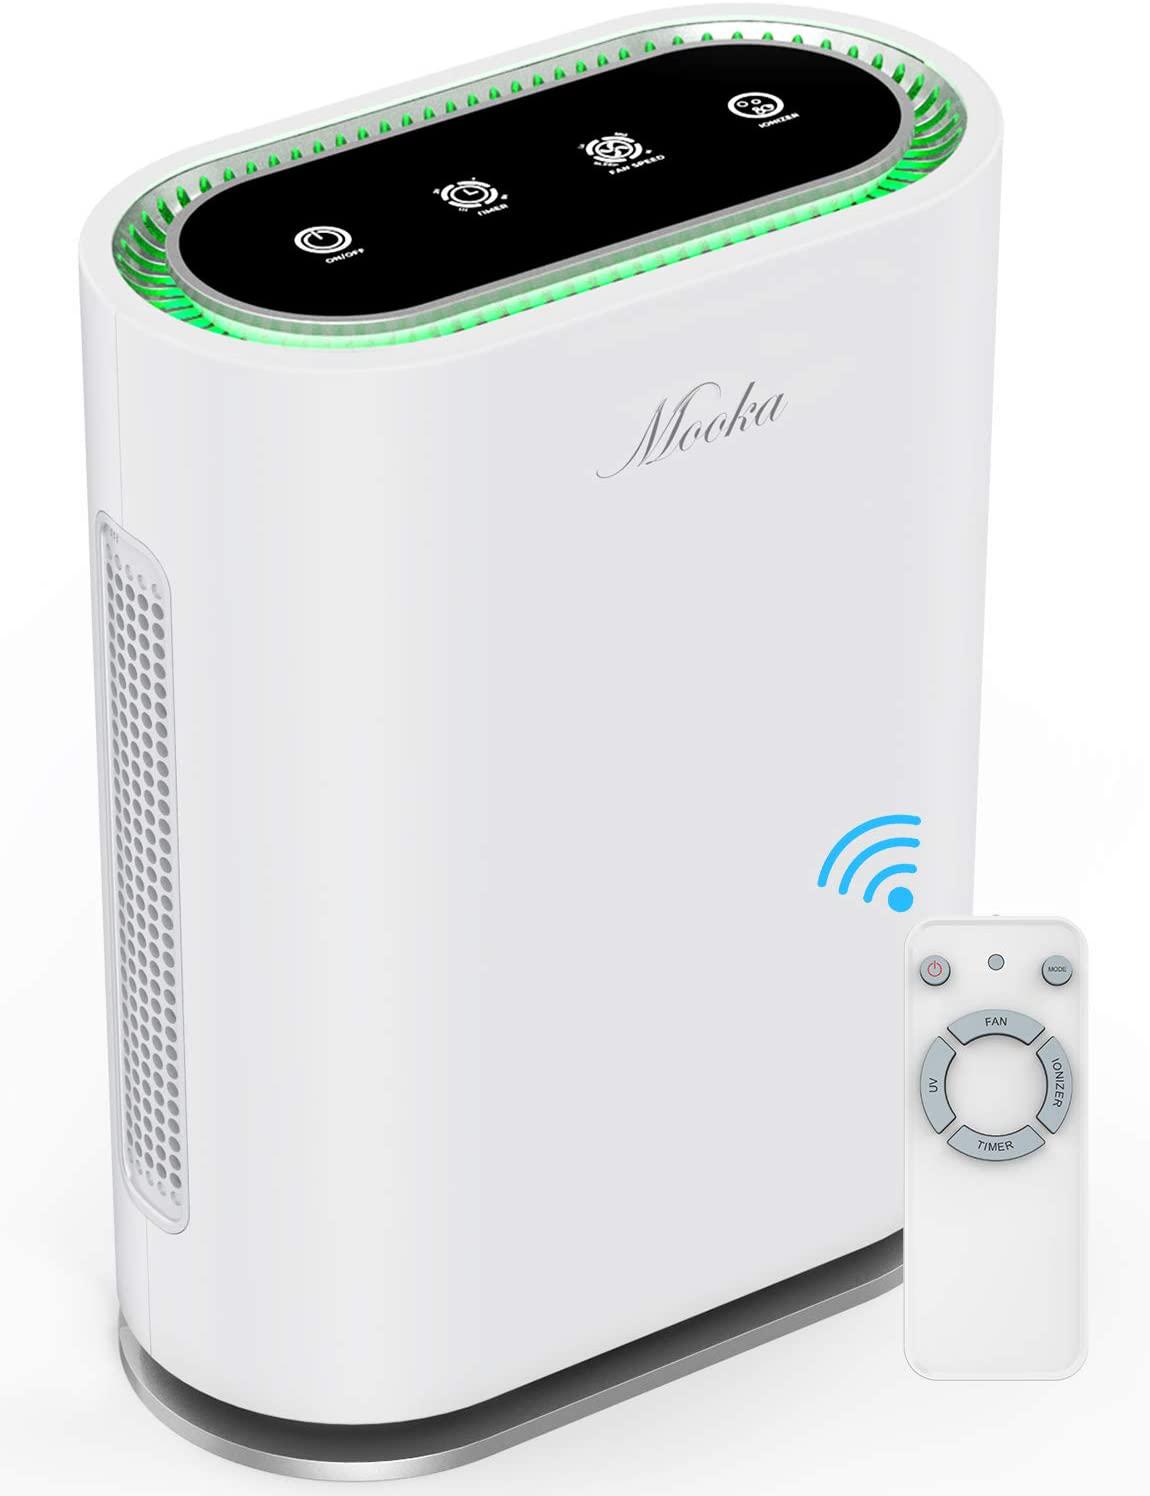 [US Direct] MOOKA True HEPA+ Air Purifier, large room to 540ft², Ionic & Sterilizer, Odor Eliminator Air Cleaner for Office & Home, Rid of Mold, Smoke, Odor 40.5*23.2*51.7